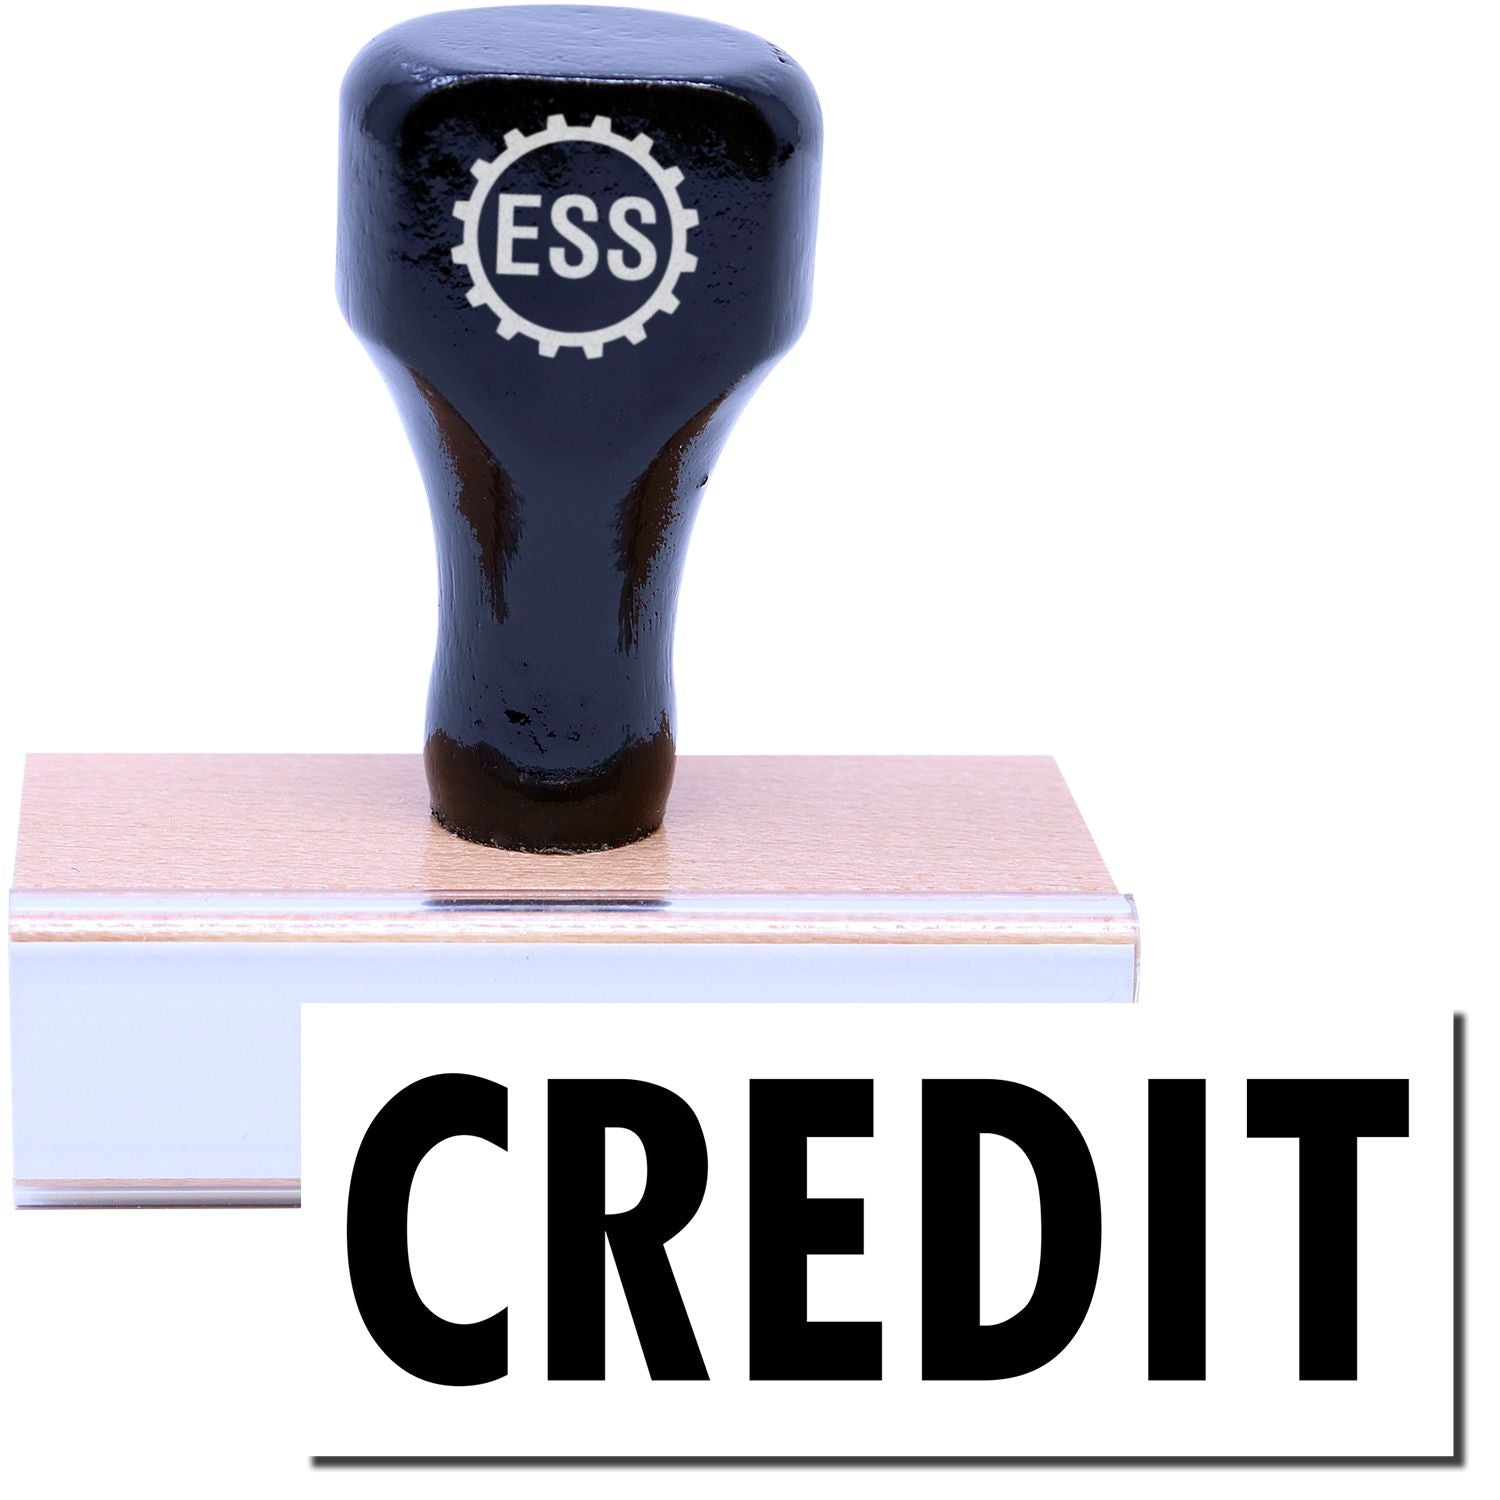 A stock office rubber stamp with a stamped image showing how the text "CREDIT" is displayed after stamping.